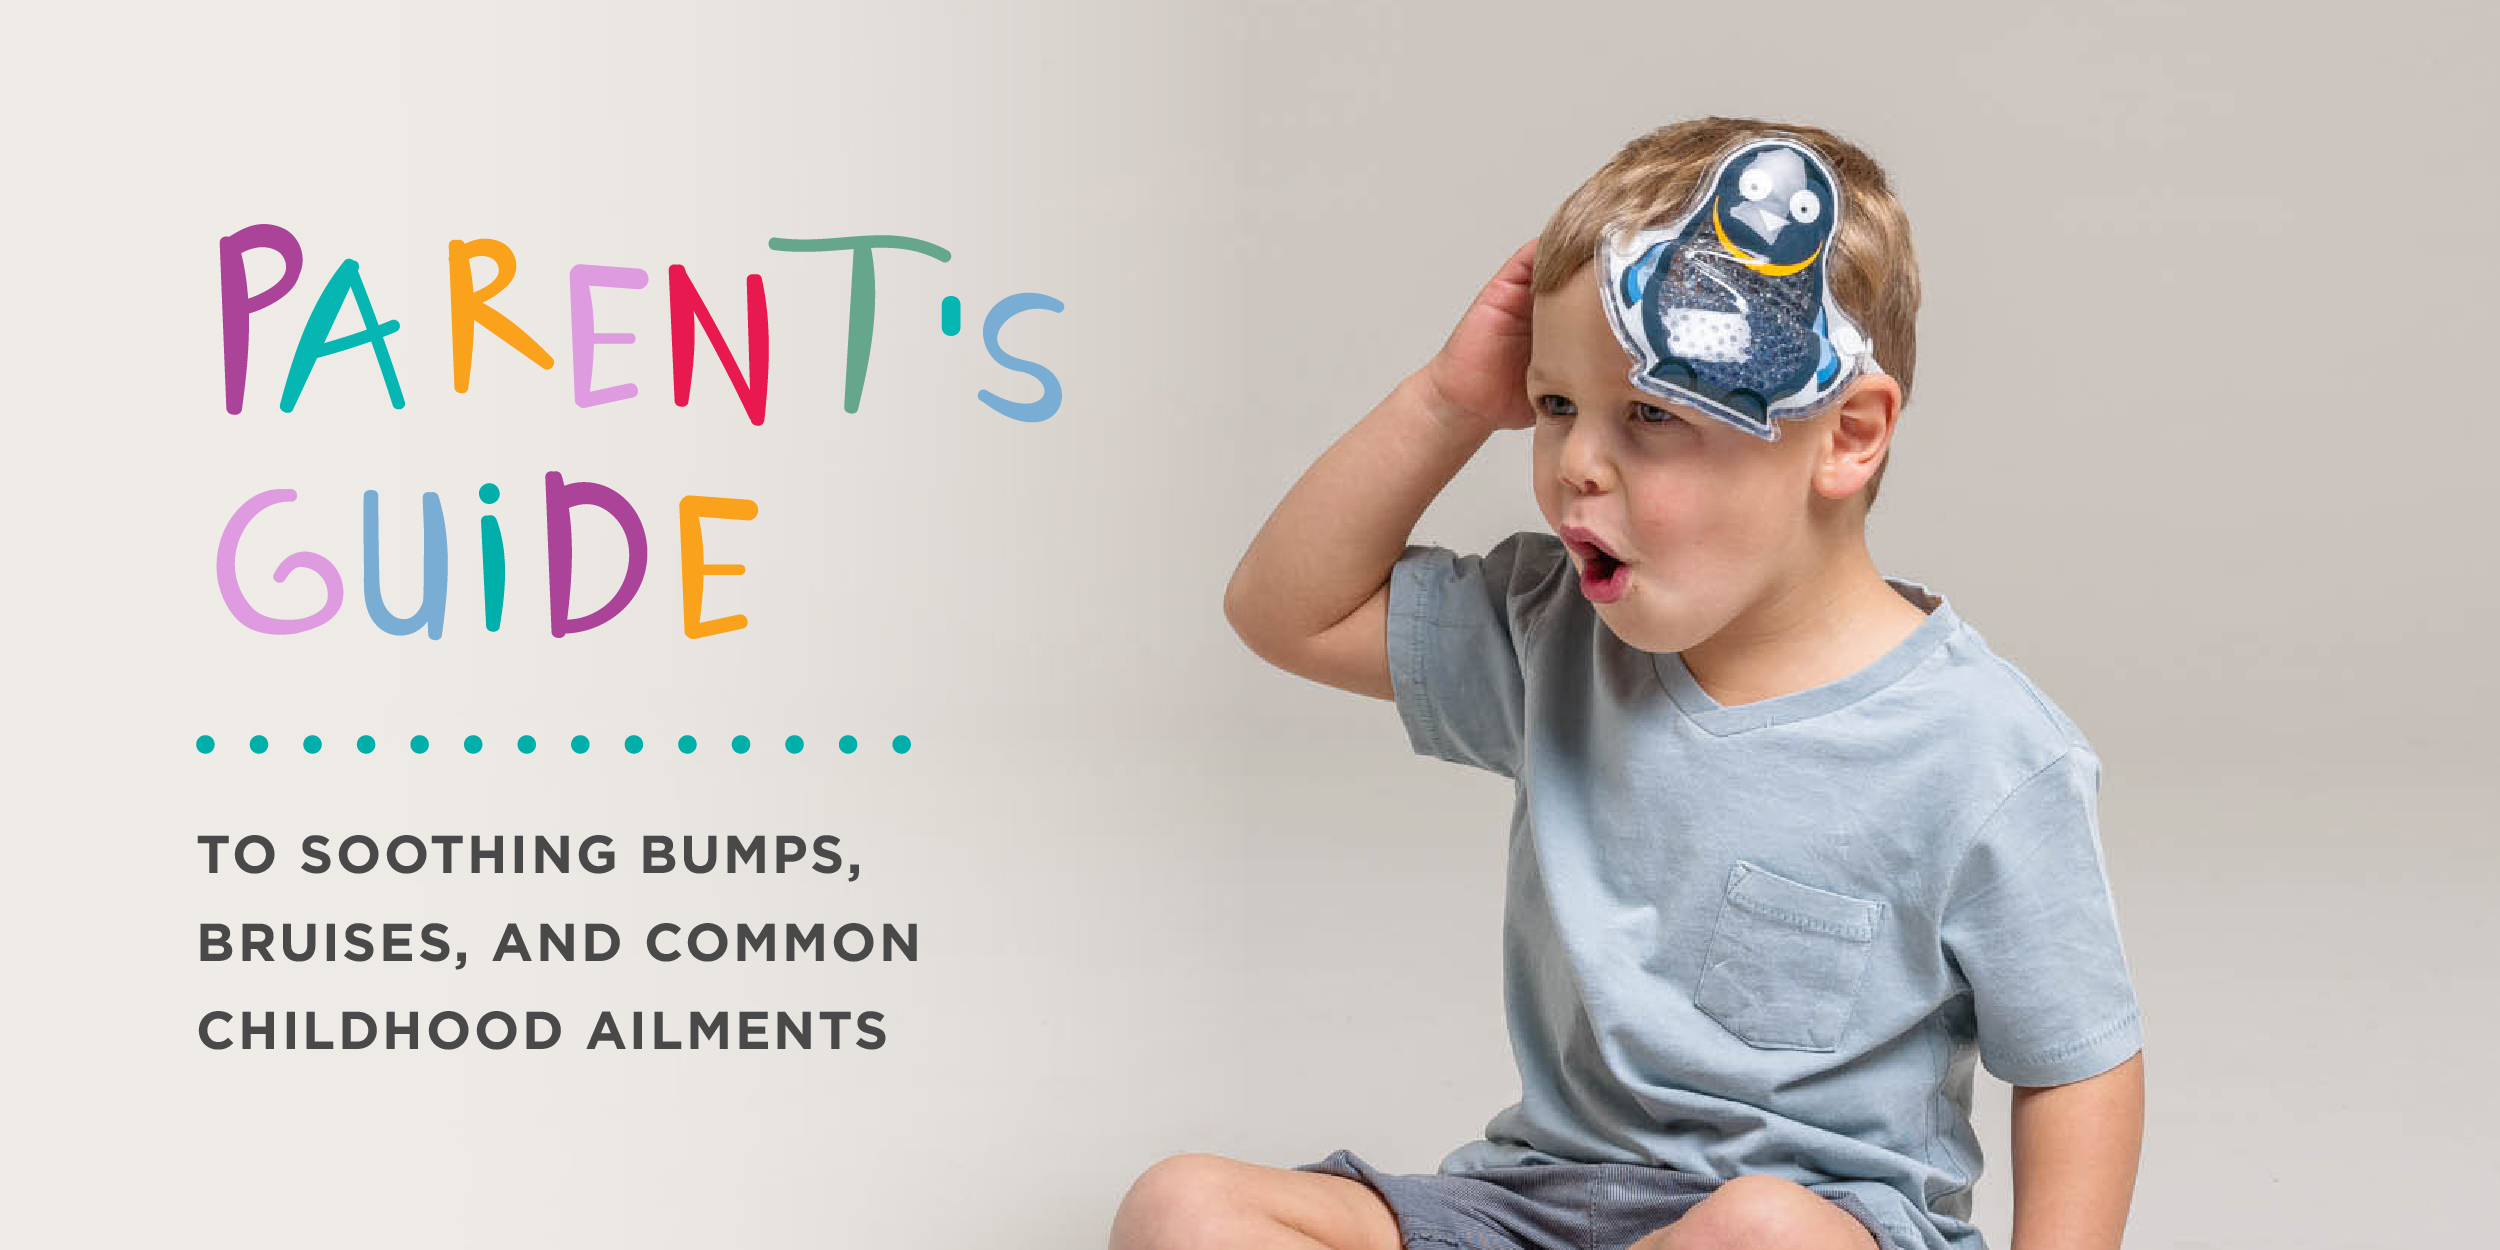 Parents Guide to Soothing Bumps, Bruises & Common Childhood Ailments BodyICE Australia